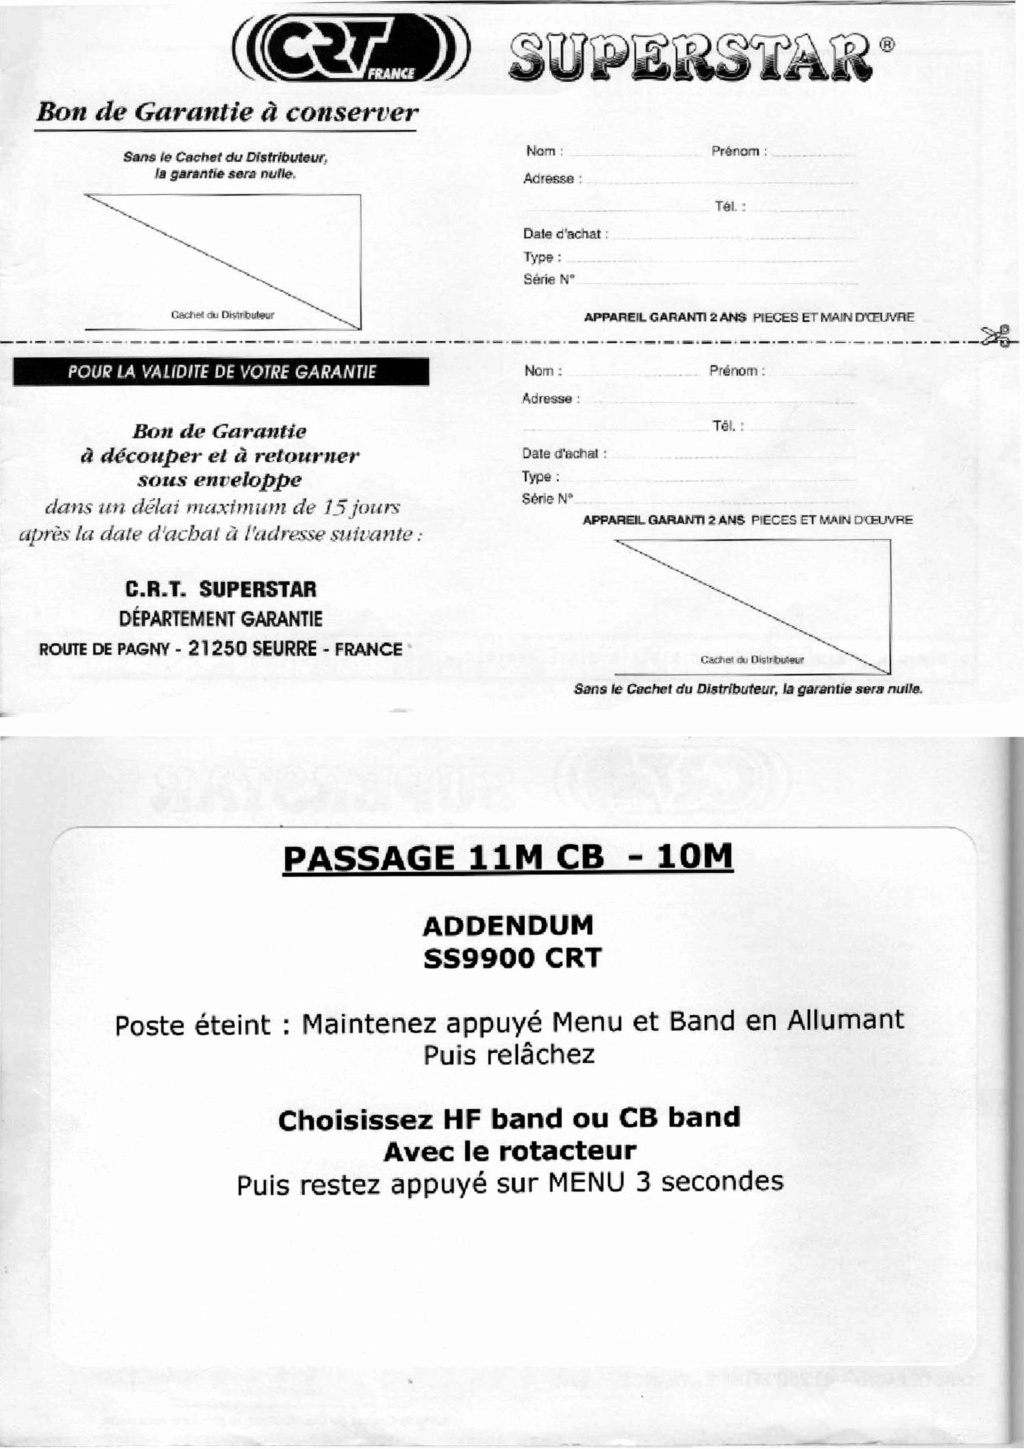 manuel - CRT SS 9900 v4 (Mobile) - Page 17 Feuill24